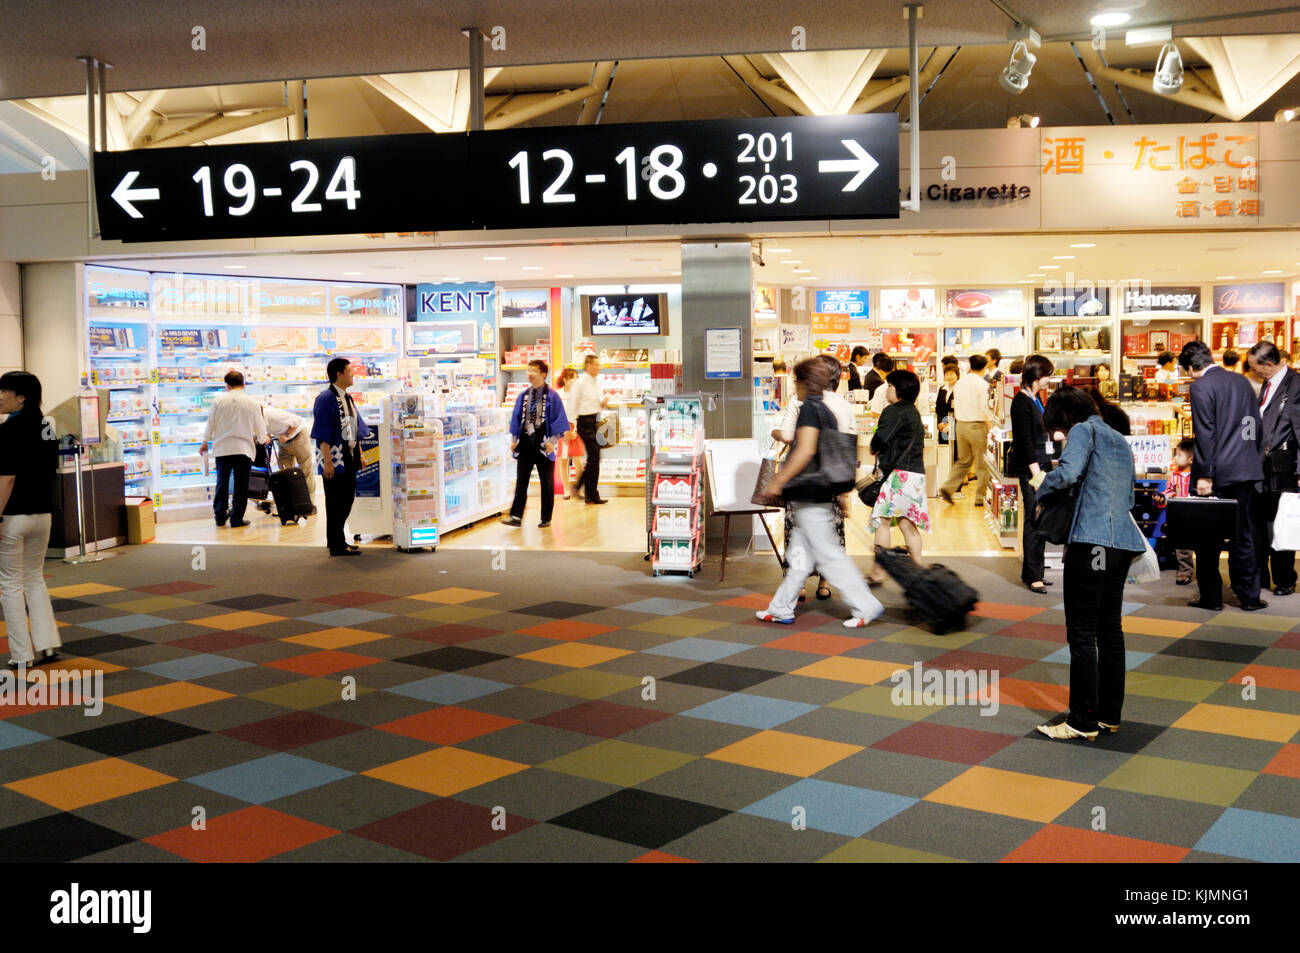 airport signs and duty-free shops in the main terminal, with multi coloured floor Stock Photo